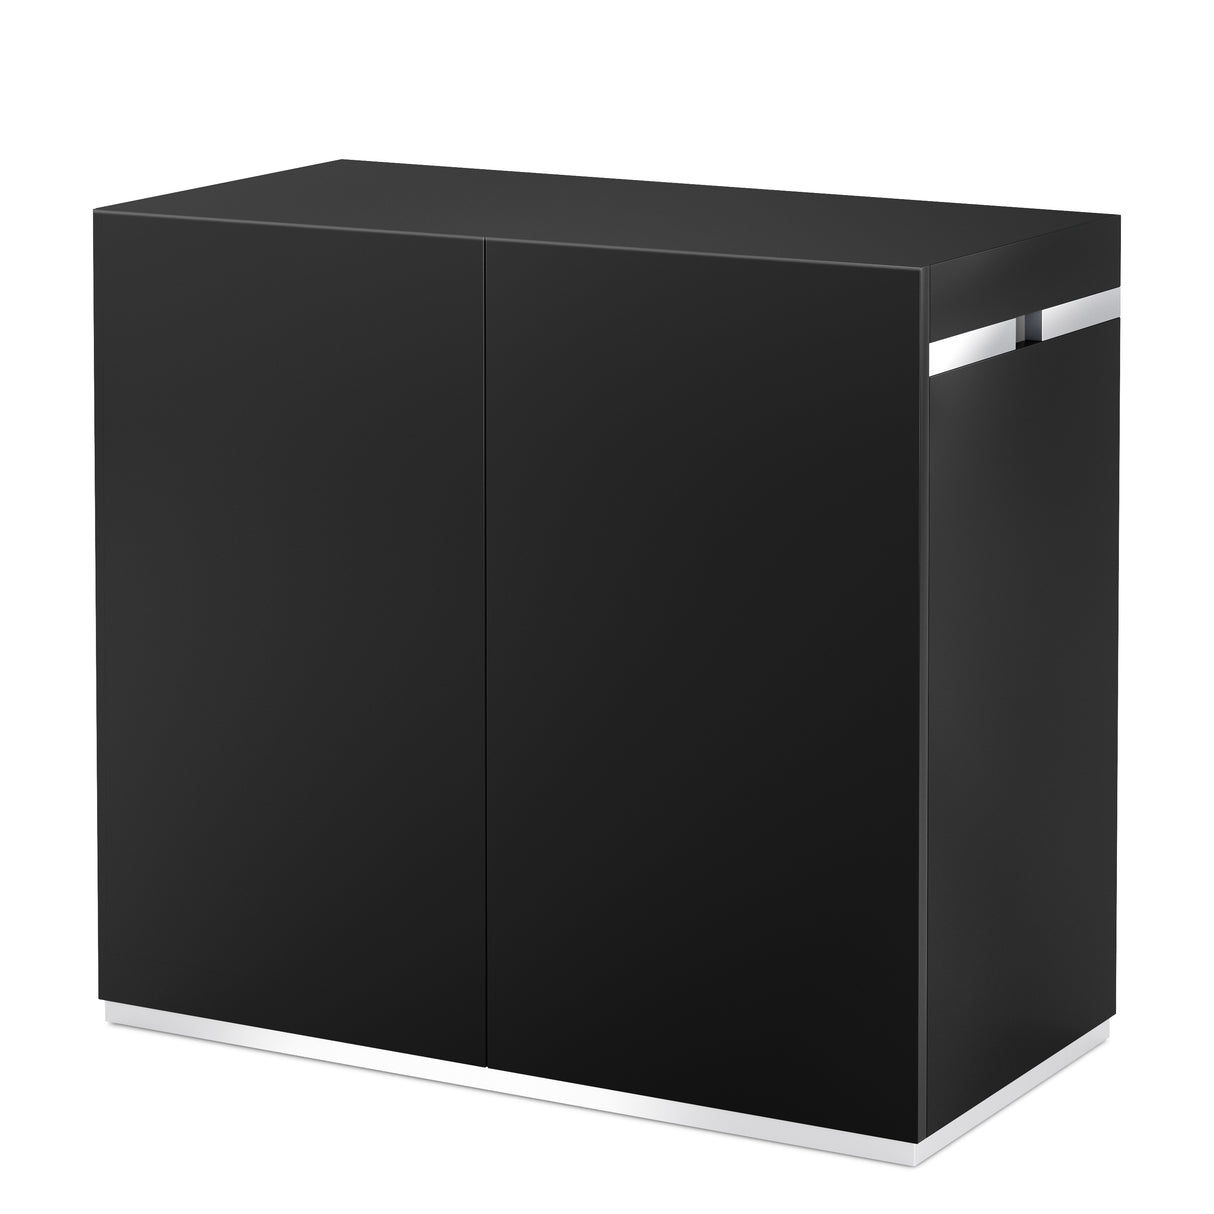 OASE ScaperLine 90 Cabinet available in Black